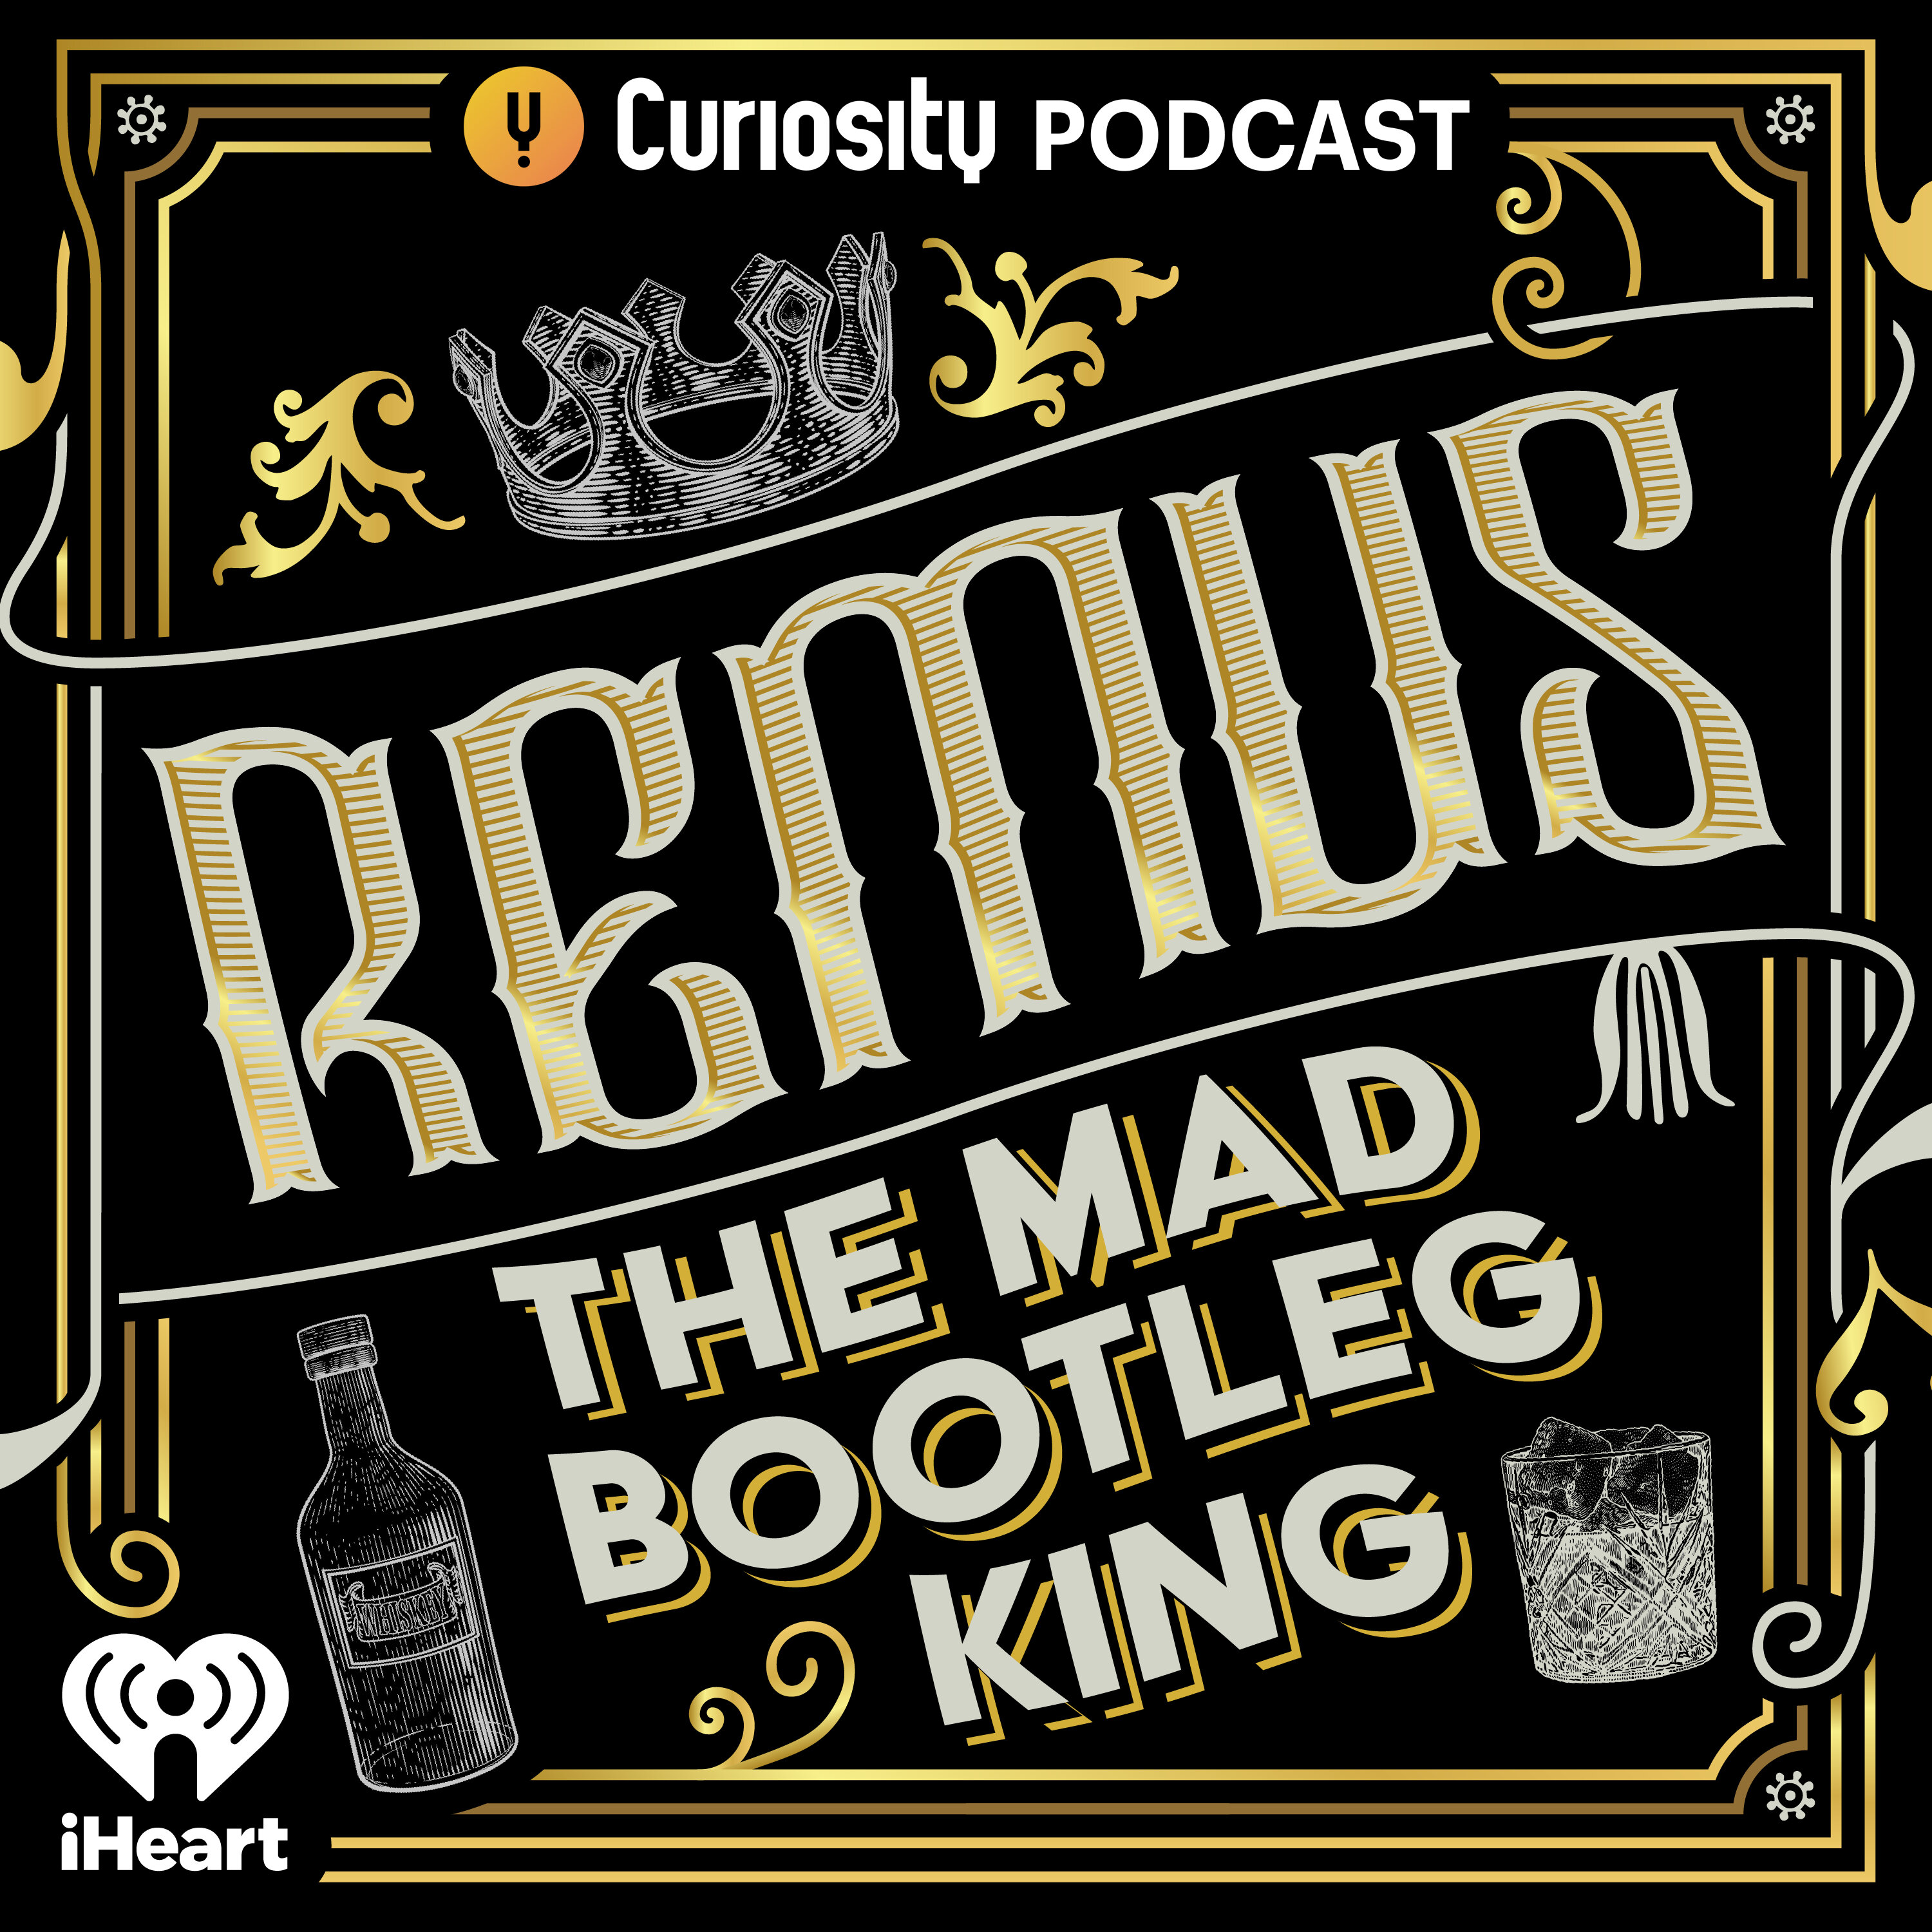 Remus: The Mad Bootleg King